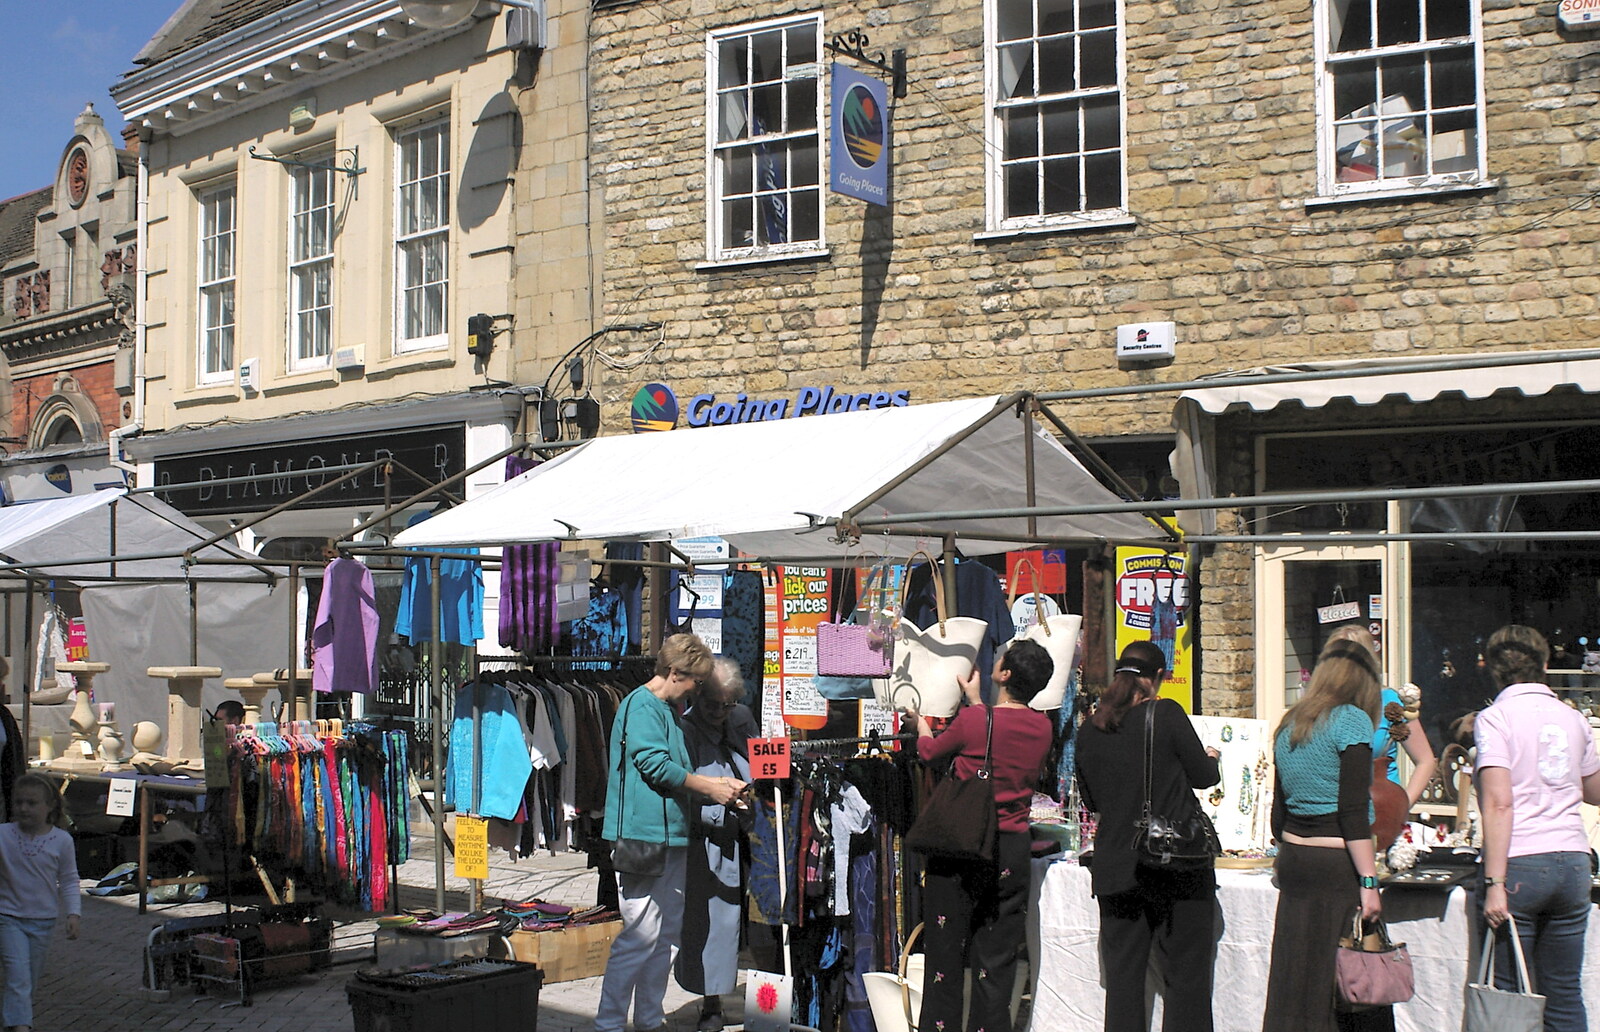 There's a market on the high street from A Postcard From Stamford, Lincolnshire - 15th May 2005